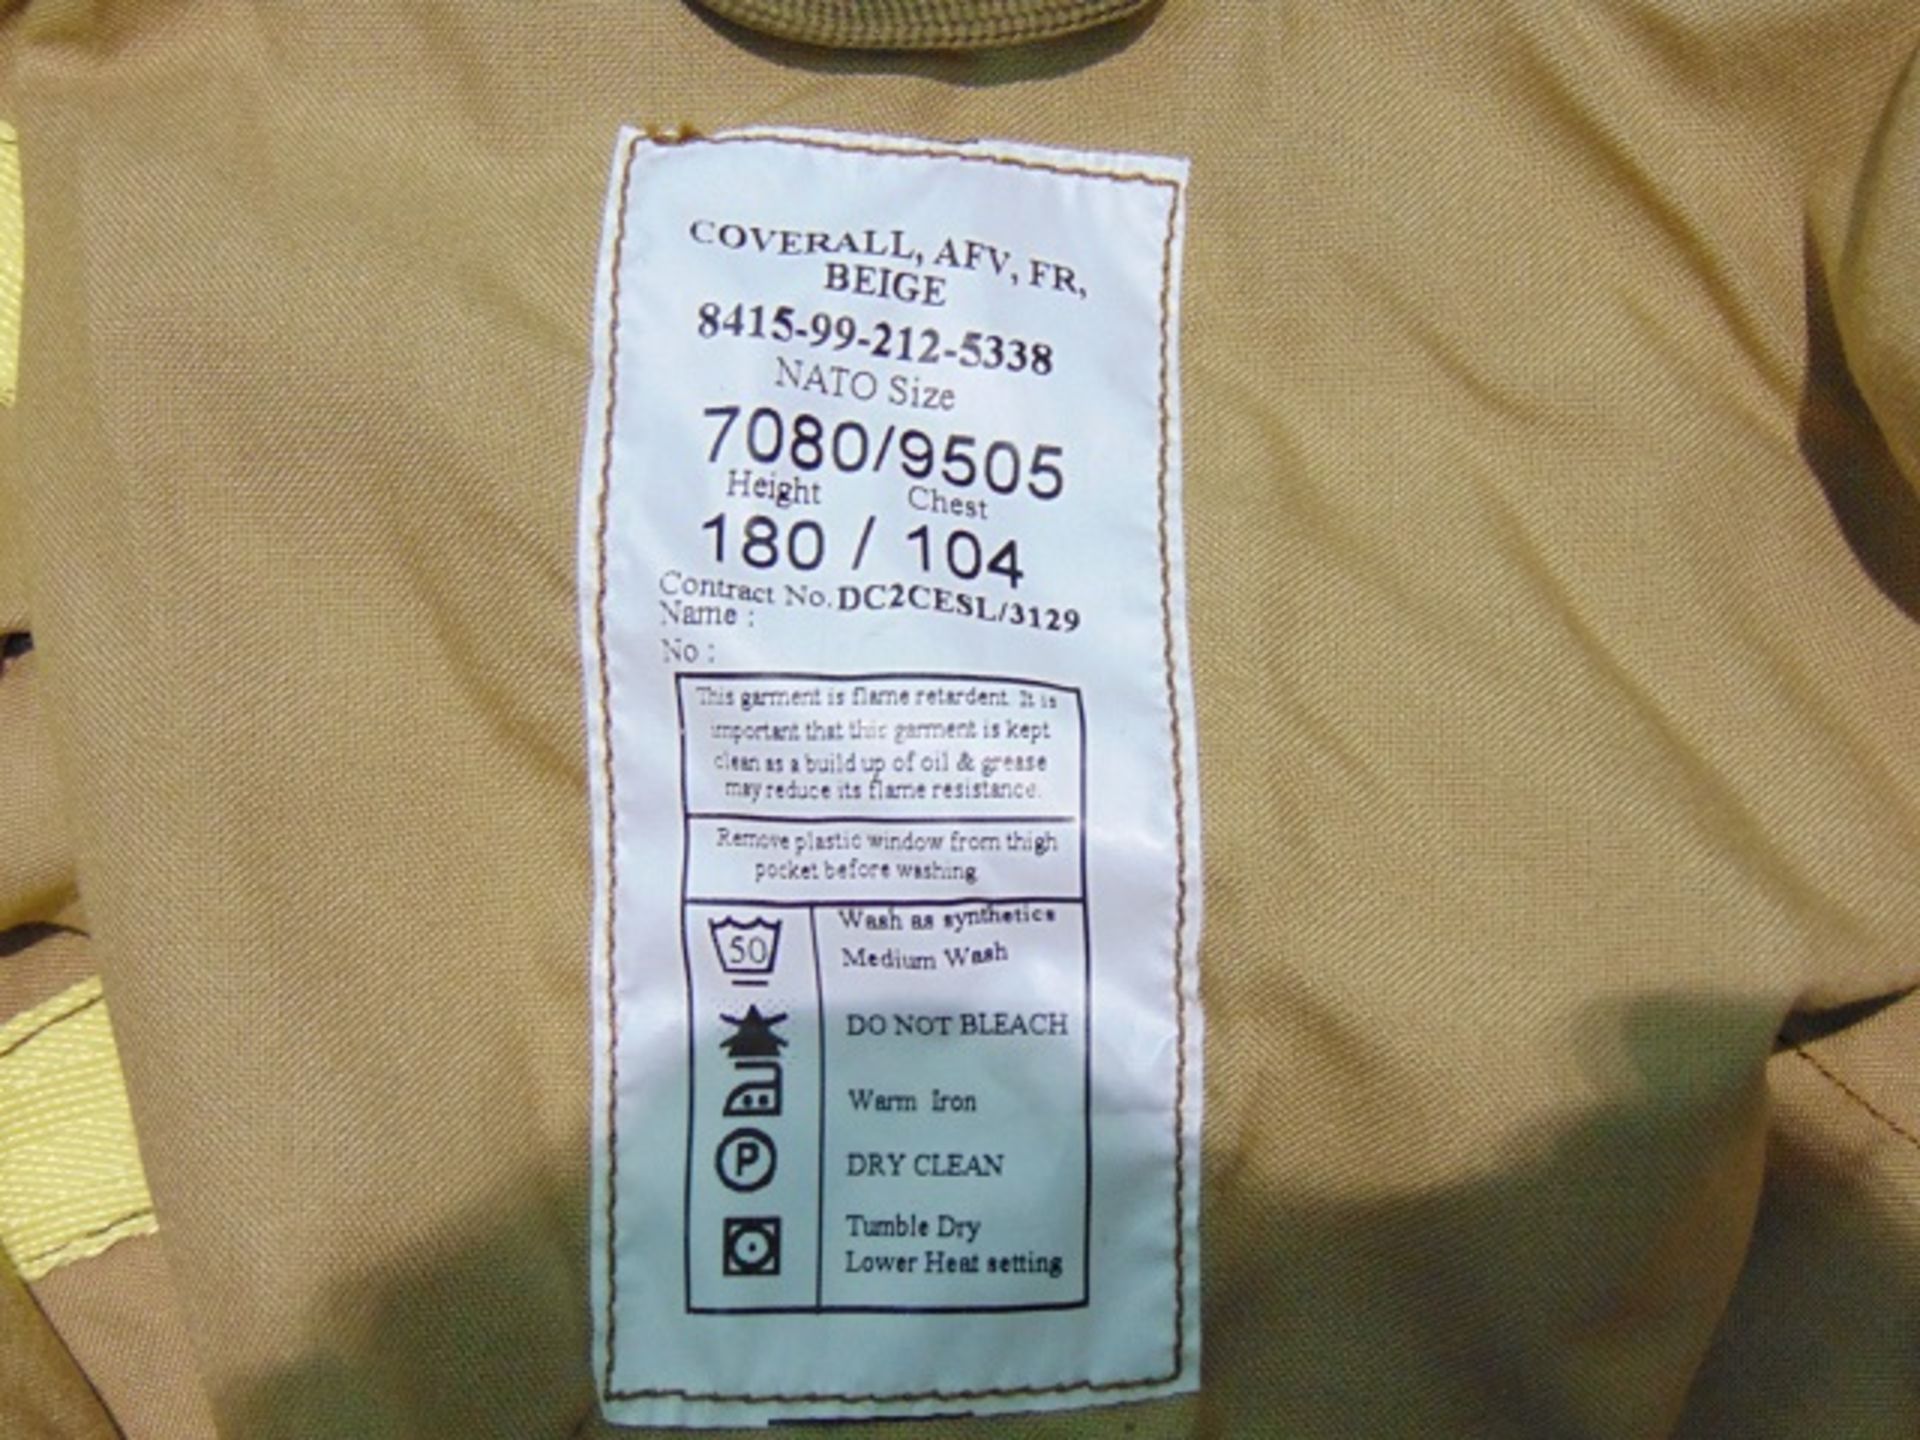 AFV Crewman Desert Coverall Size 180/104 - Image 3 of 3